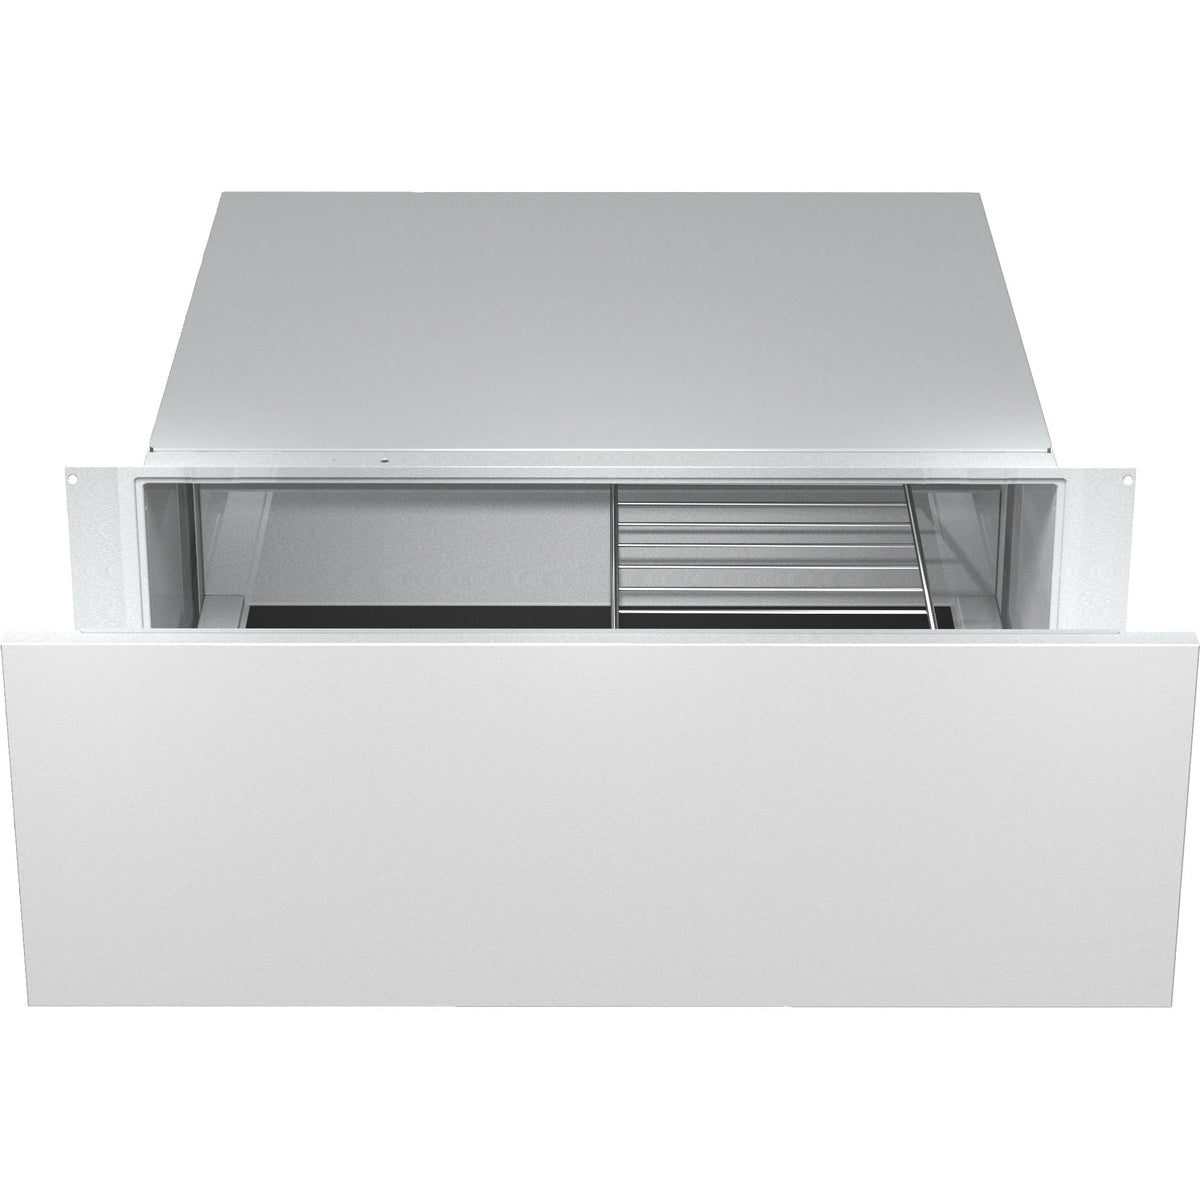 Warming Drawers 30 Inches 30638052USA IMAGE 1